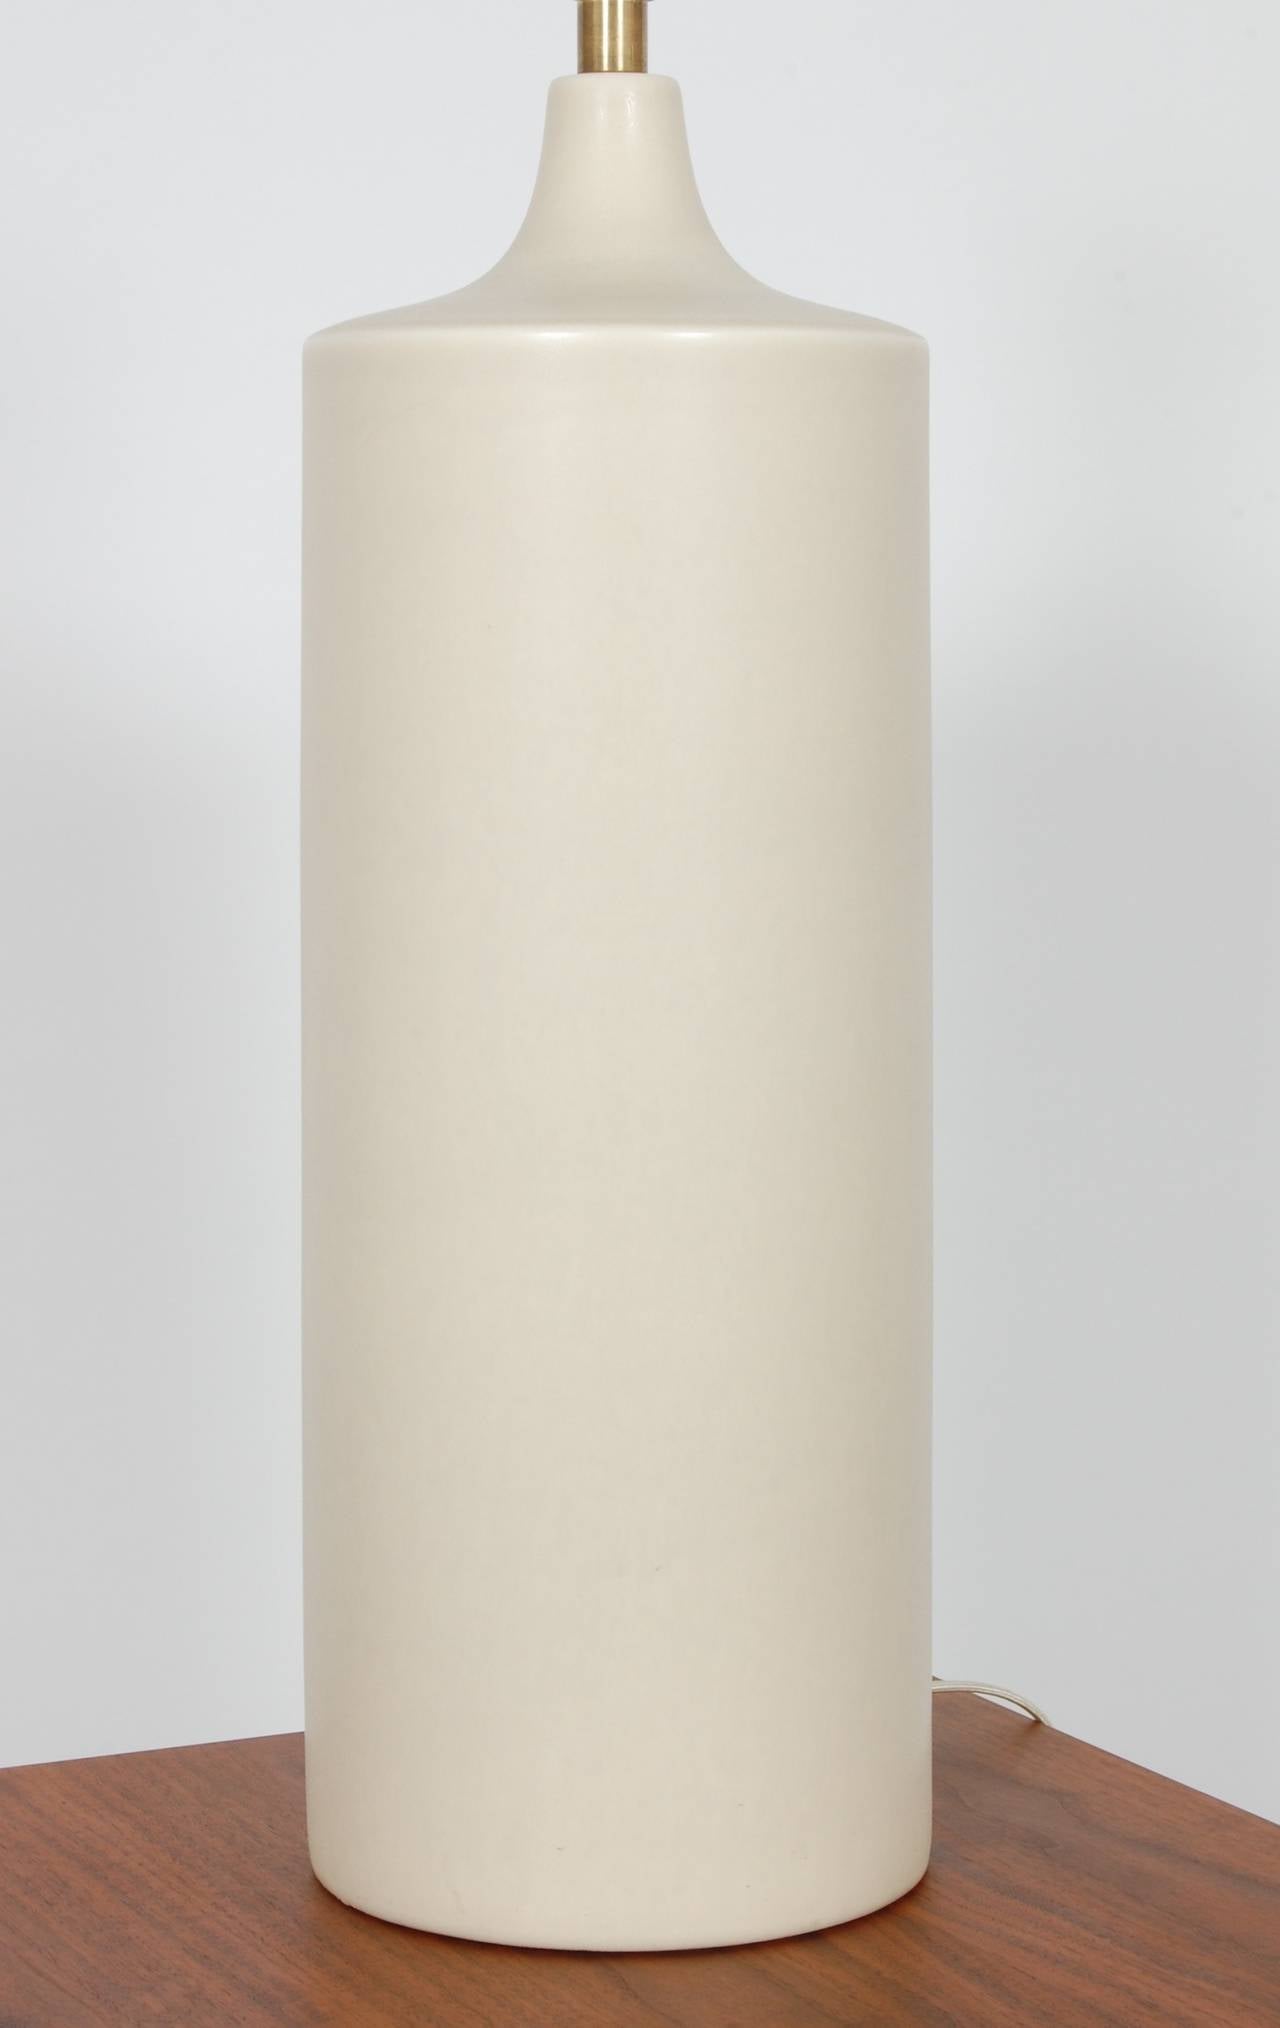 Large cylindrical form eggshell white ceramic lamp with a tapered top and brass accent, this lamp has been rewired. The height measurement is from base to the top of the socket.